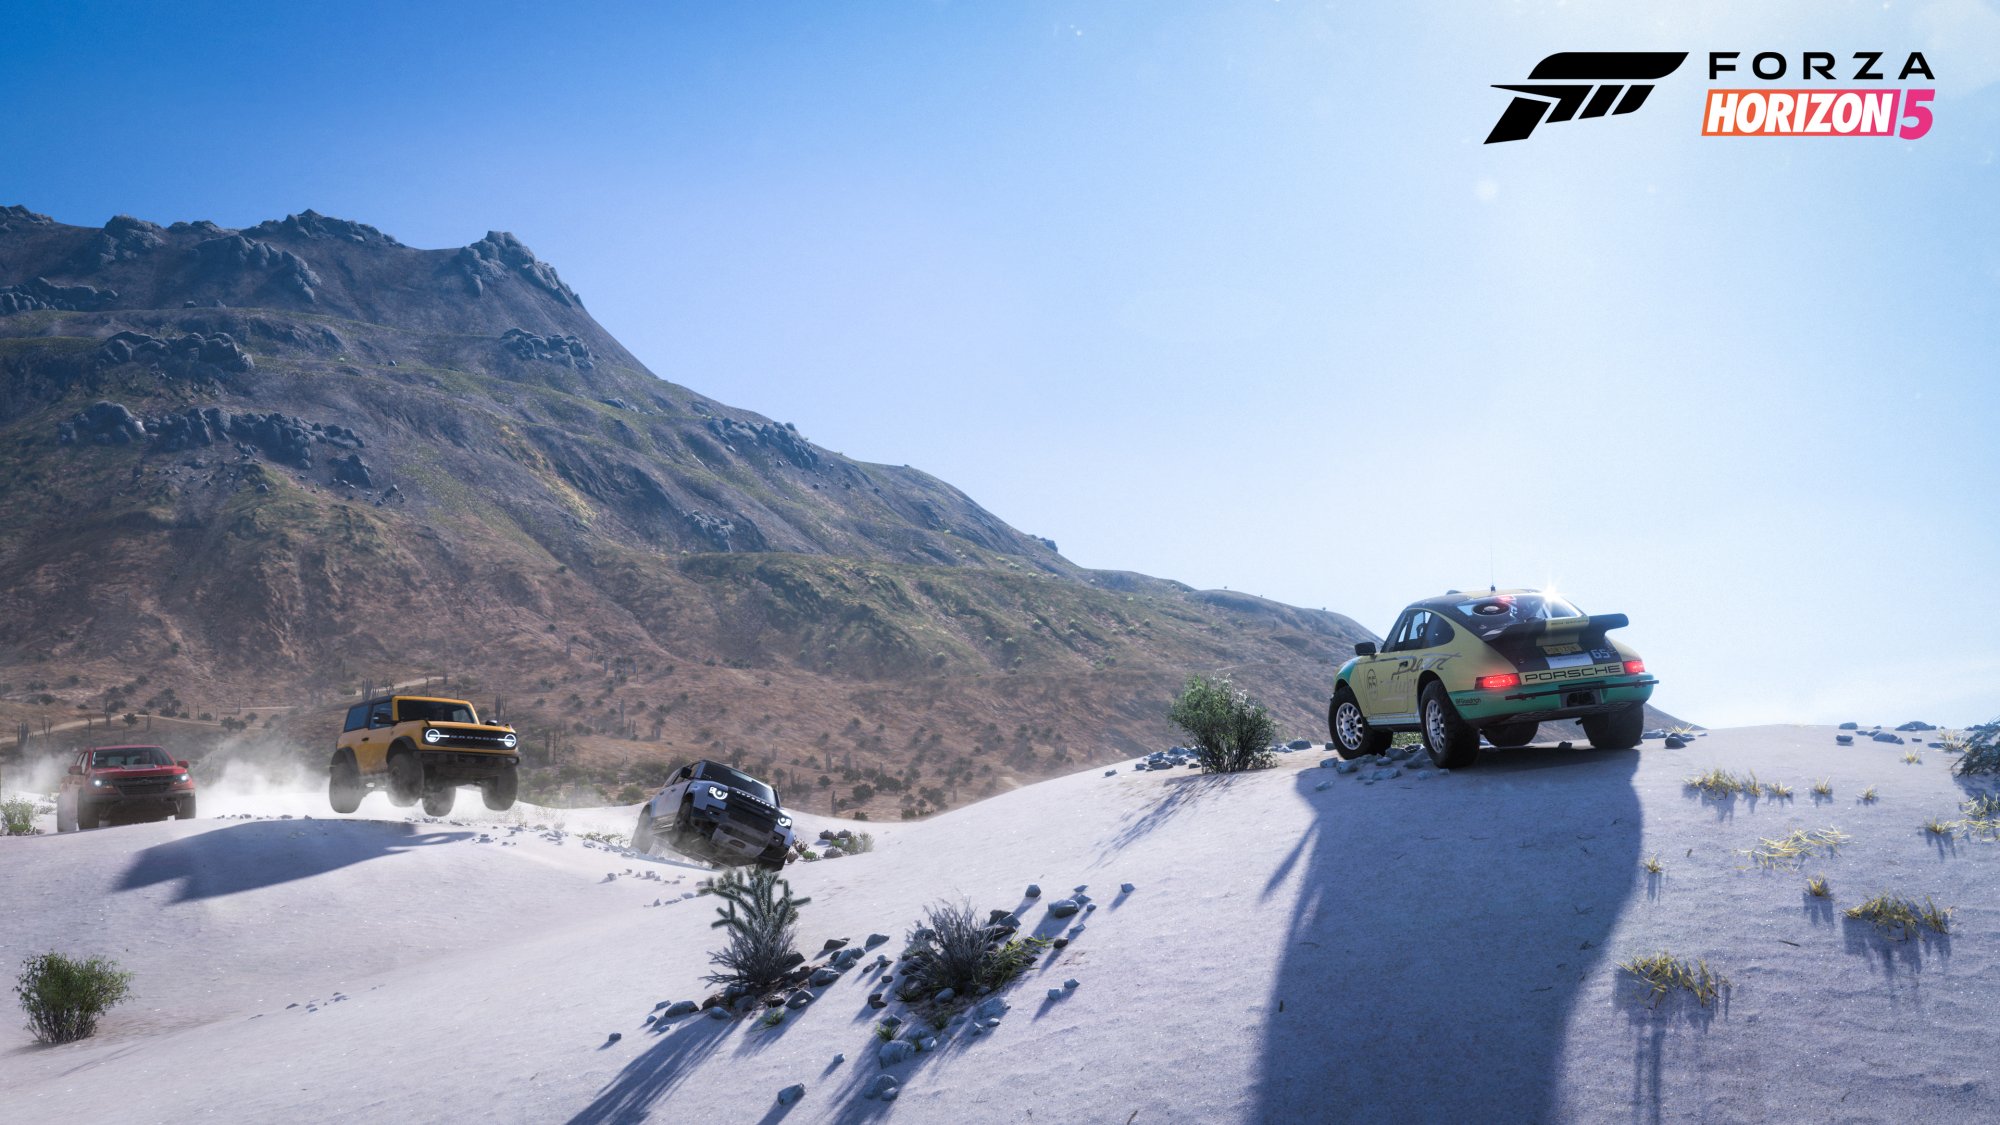 Marketing image for Forza Horizon 5 depicting a porsche cresting a sand dune facing down on coming SUVs.